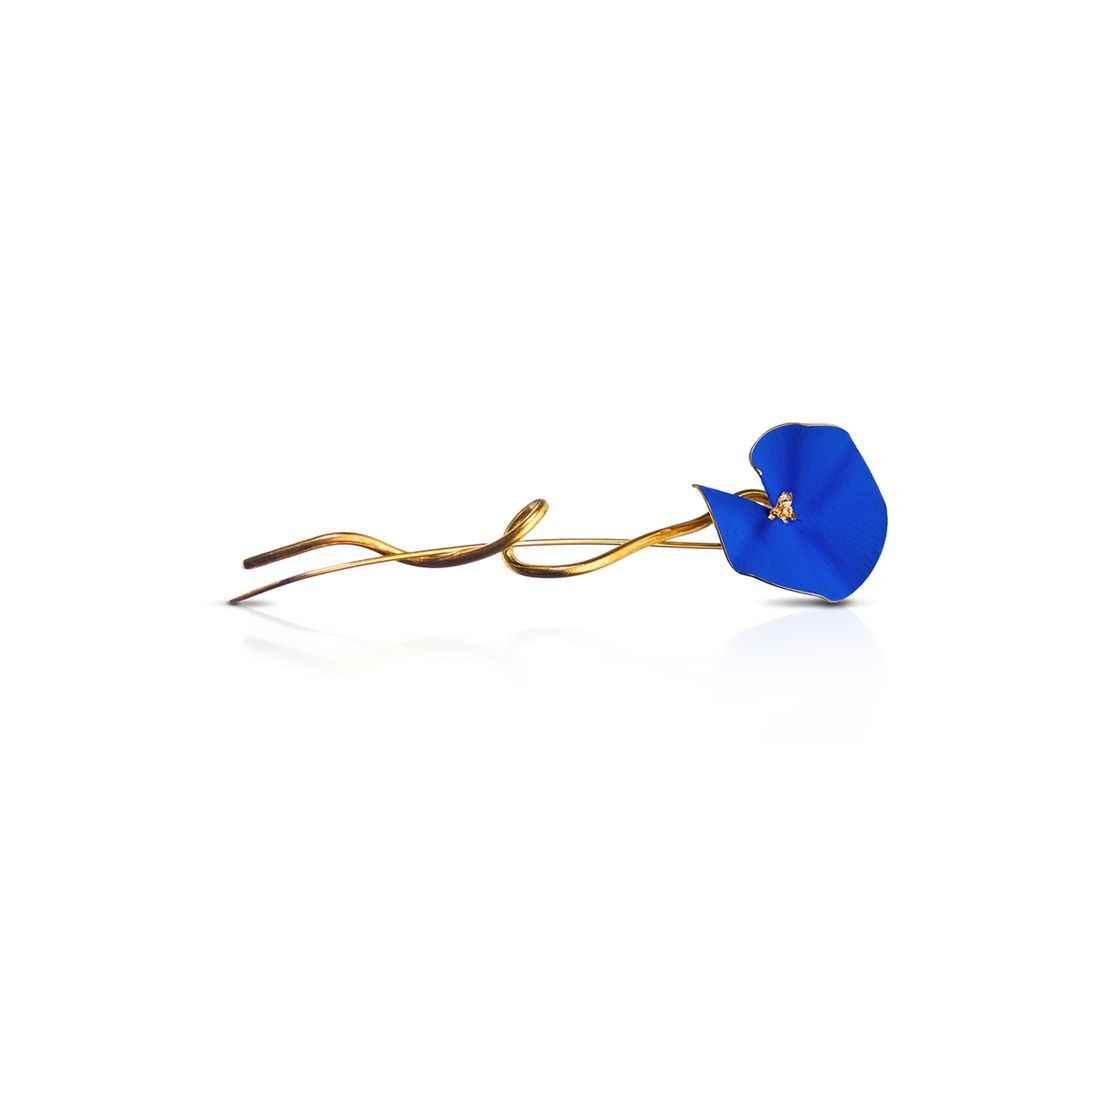 Royal blue flower with gold center on gold stem brooch. Handpainted with natural pigments, with a velvet finish.